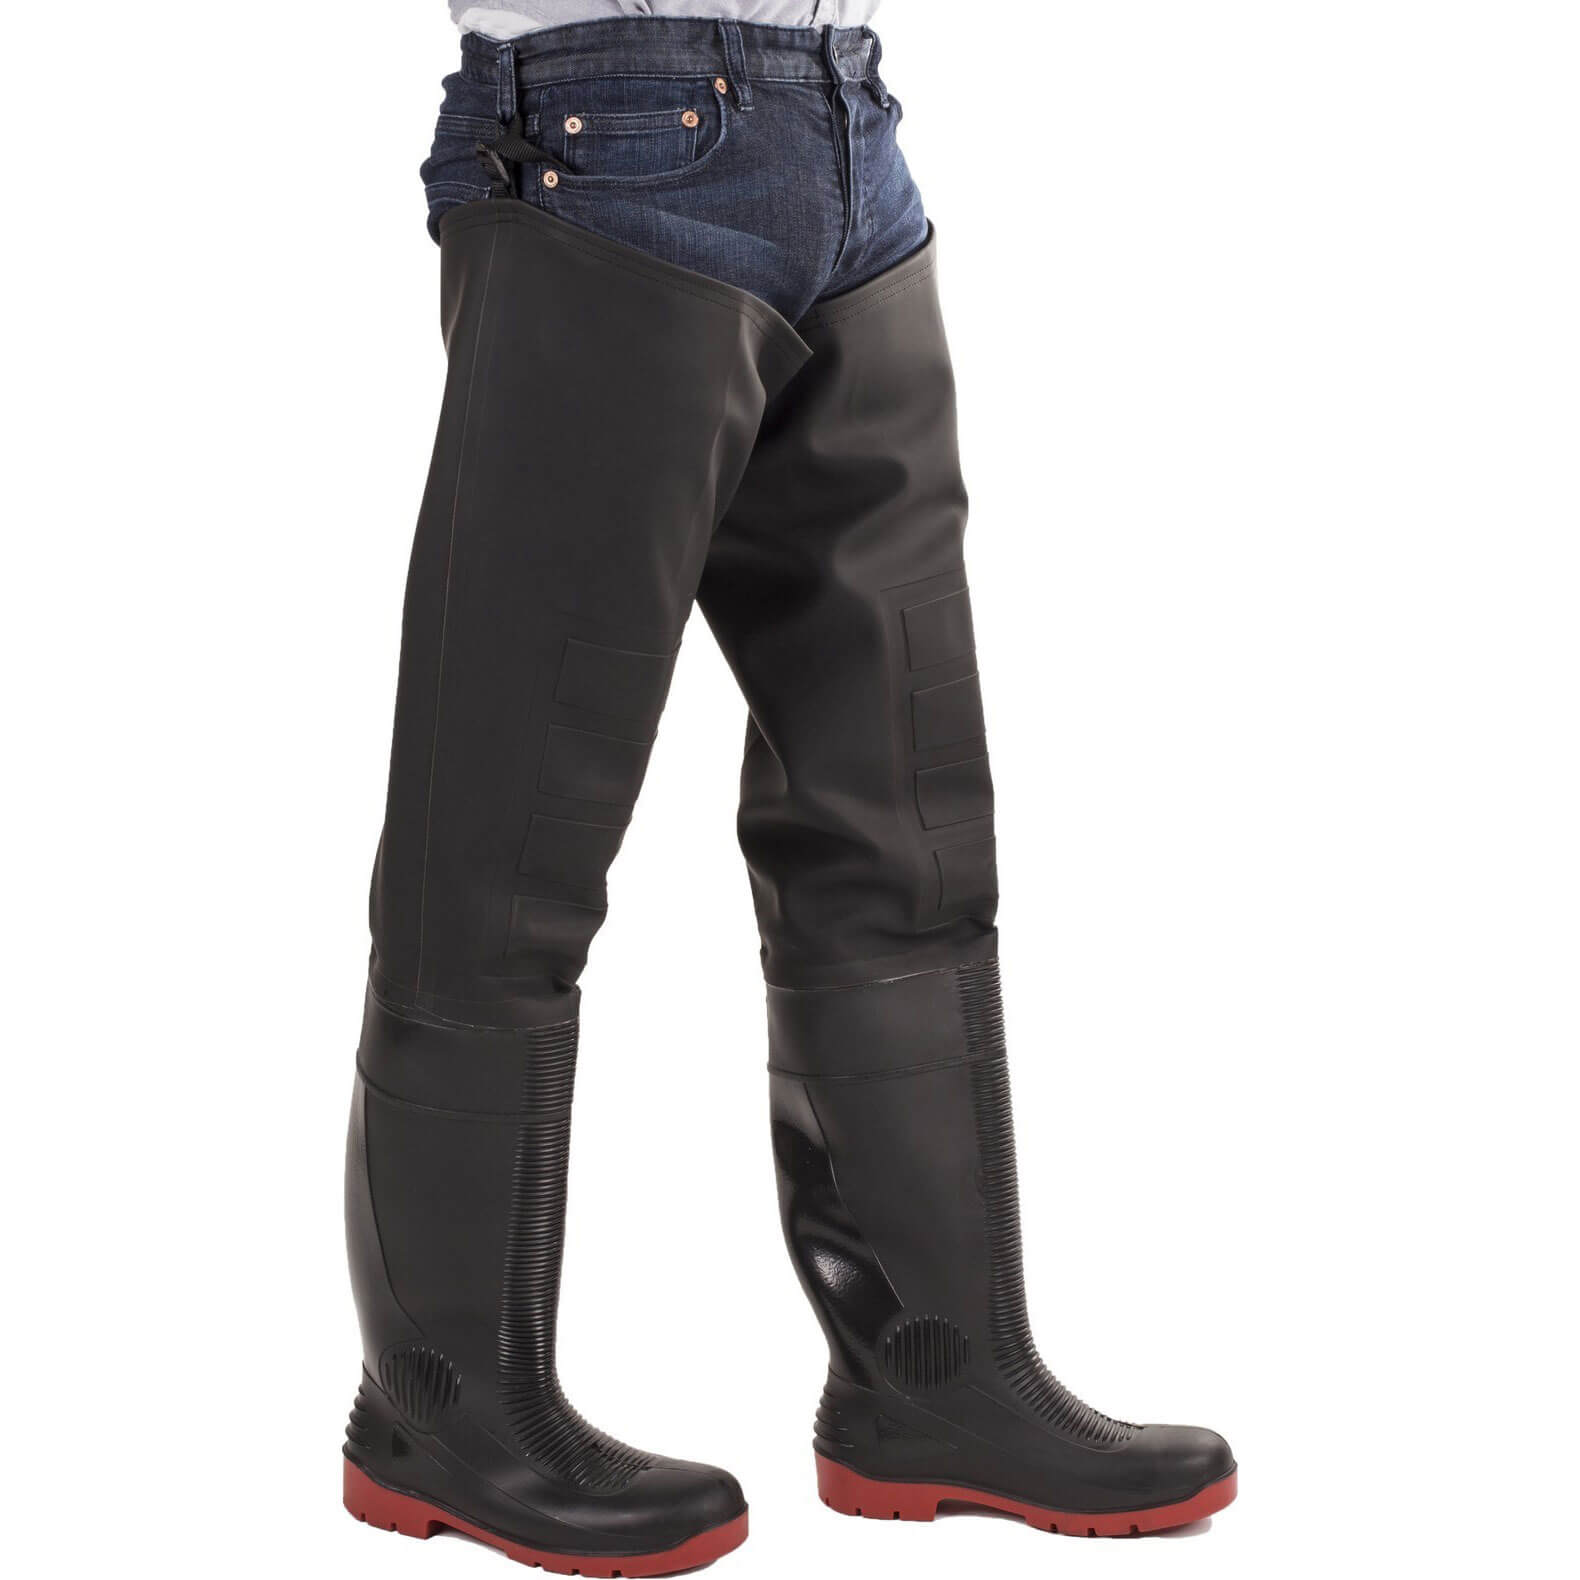 Image of Amblers Safety Rhone Thigh Safety Wader Black / Red Size 10